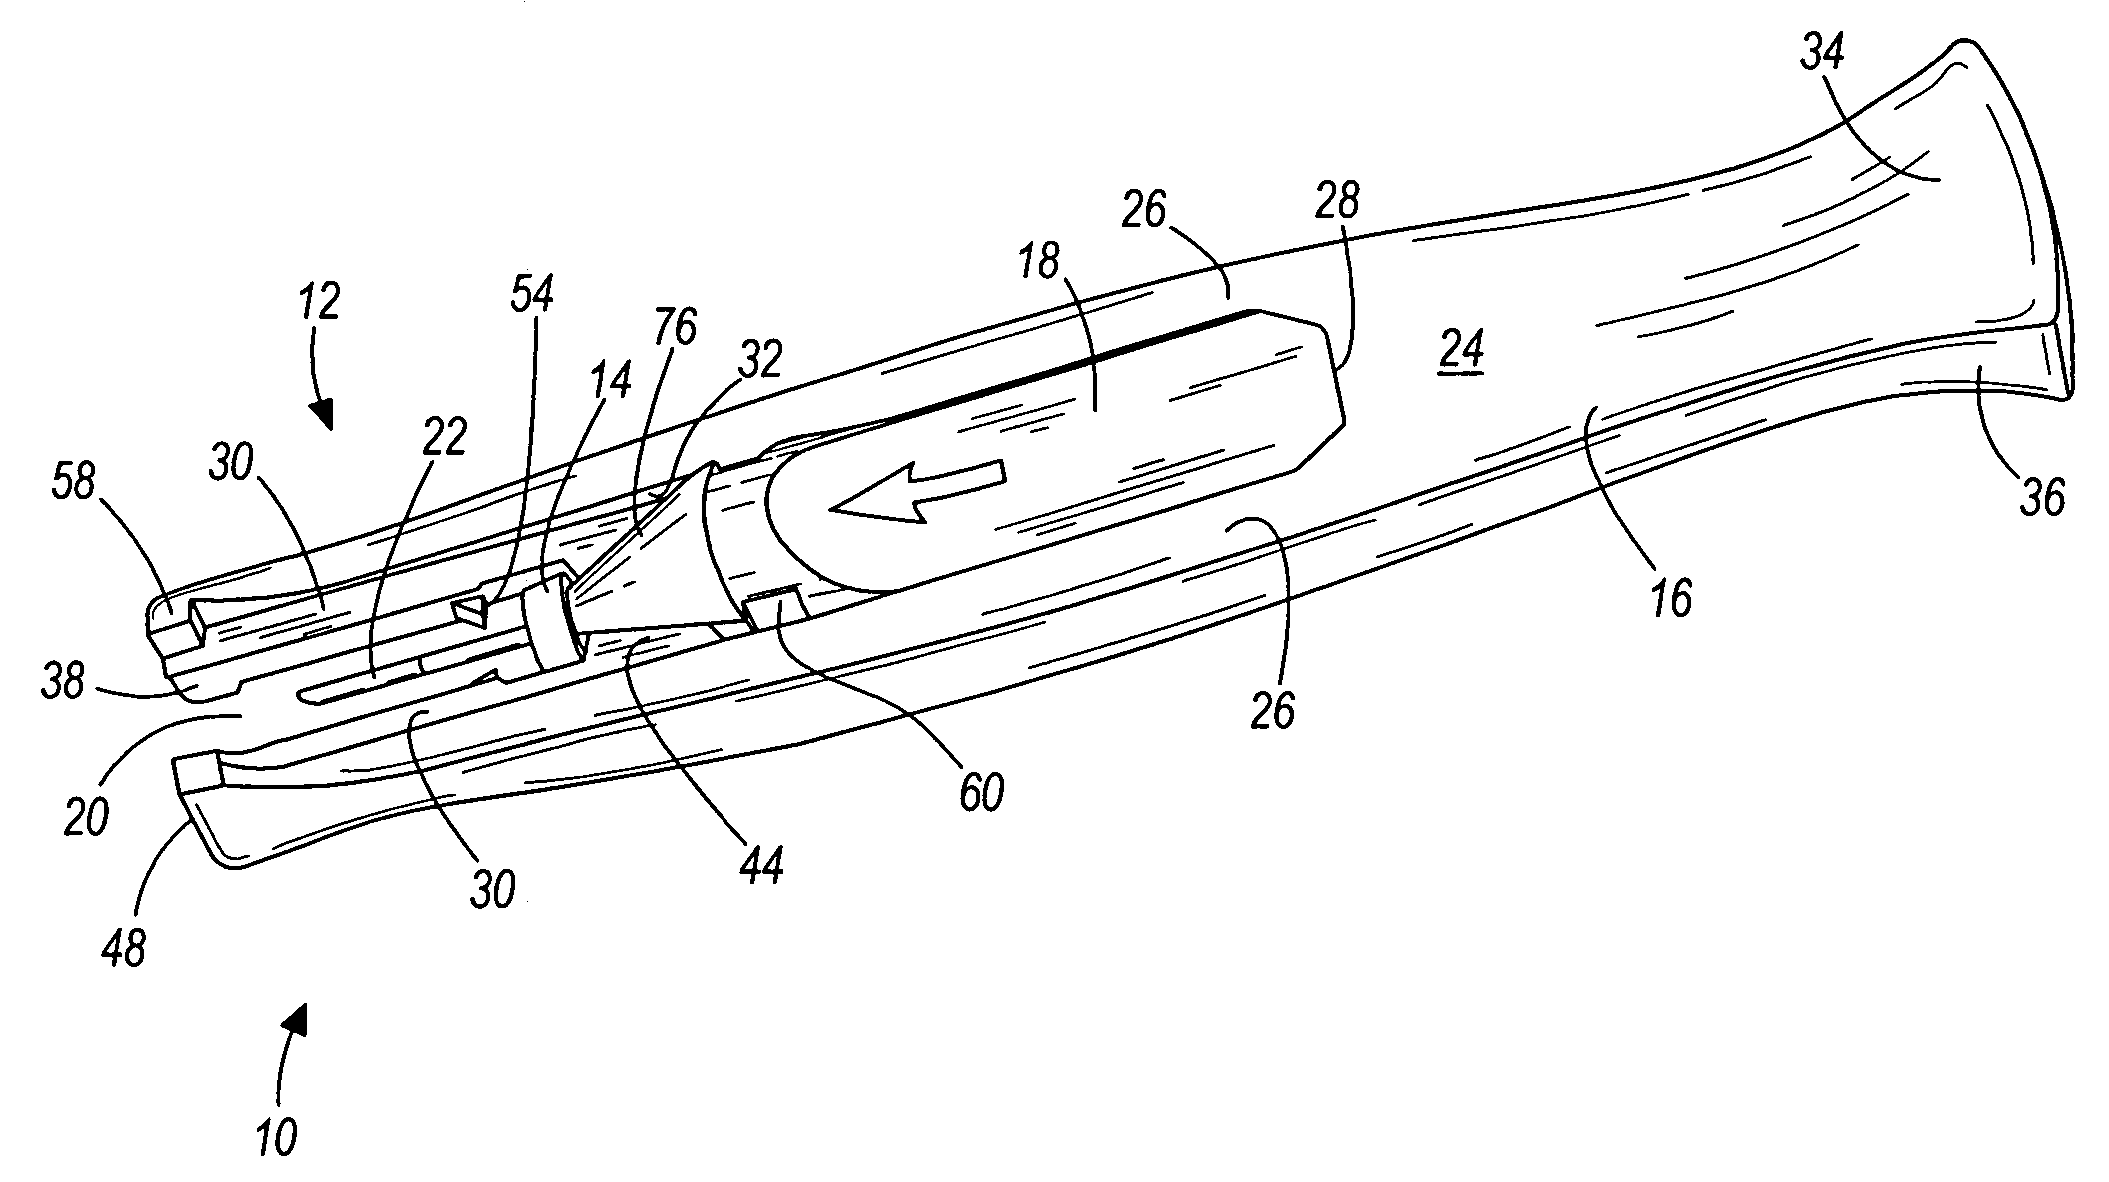 Ophthalmic cannula insertion tool and method